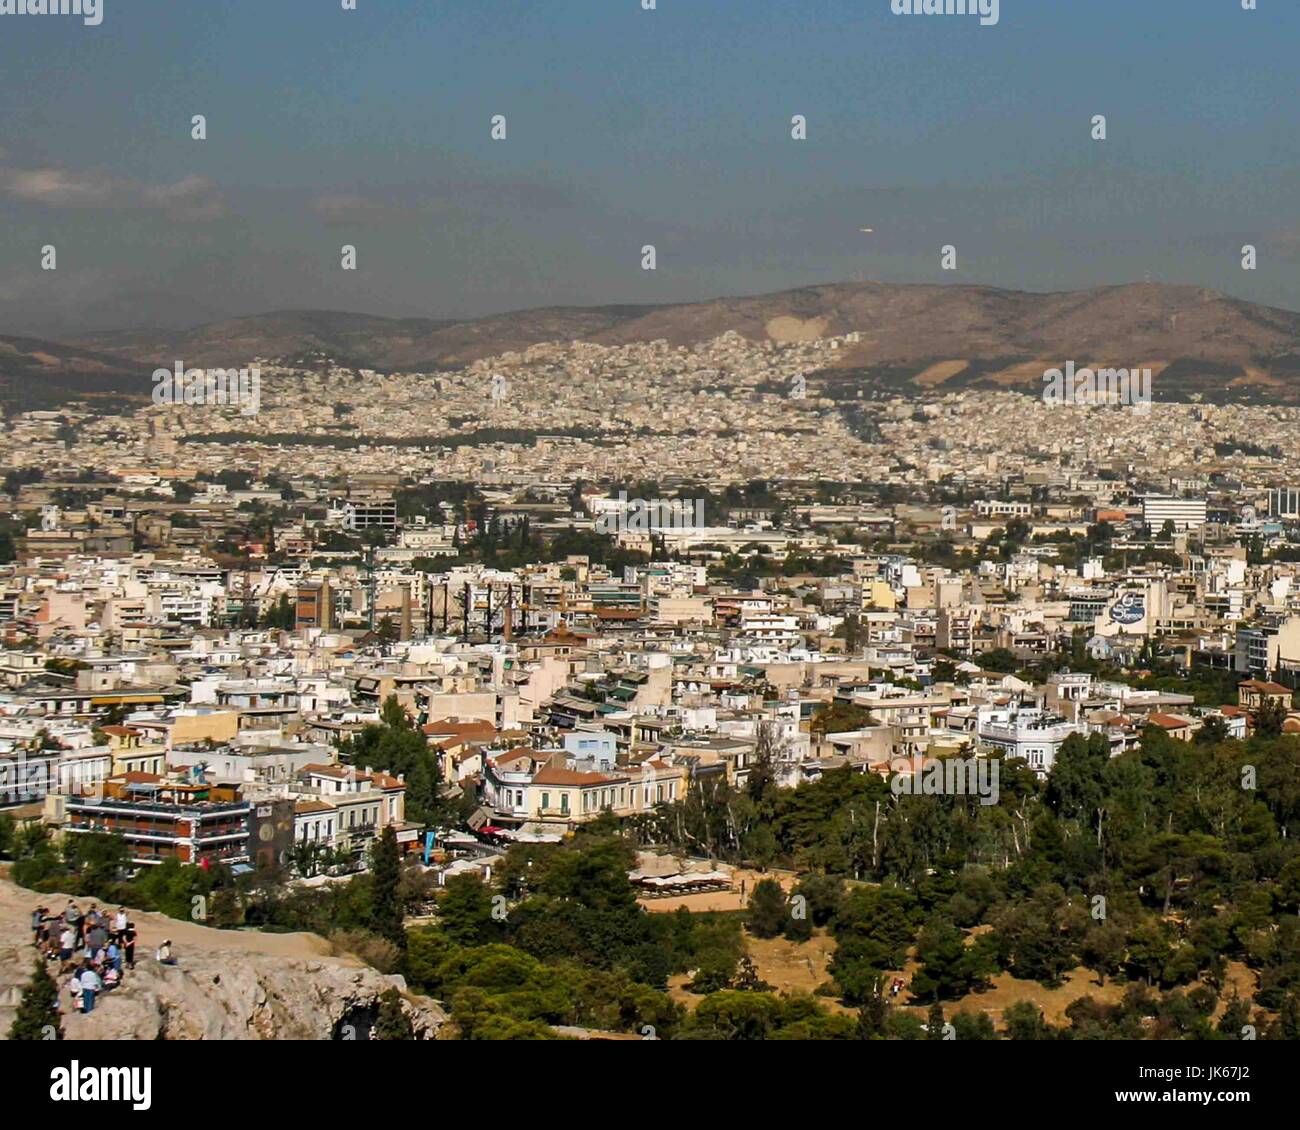 Athens, Greece. 30th Sep, 2004. The city of Athens, capitol of Greece, is viewed by tourists from Mars Hill (Areopagus), a prominent rock outcropping, northwest of the Acropolis in Athens, Greece, a favorite international tourism destination. Credit: Arnold Drapkin/ZUMA Wire/Alamy Live News Stock Photo